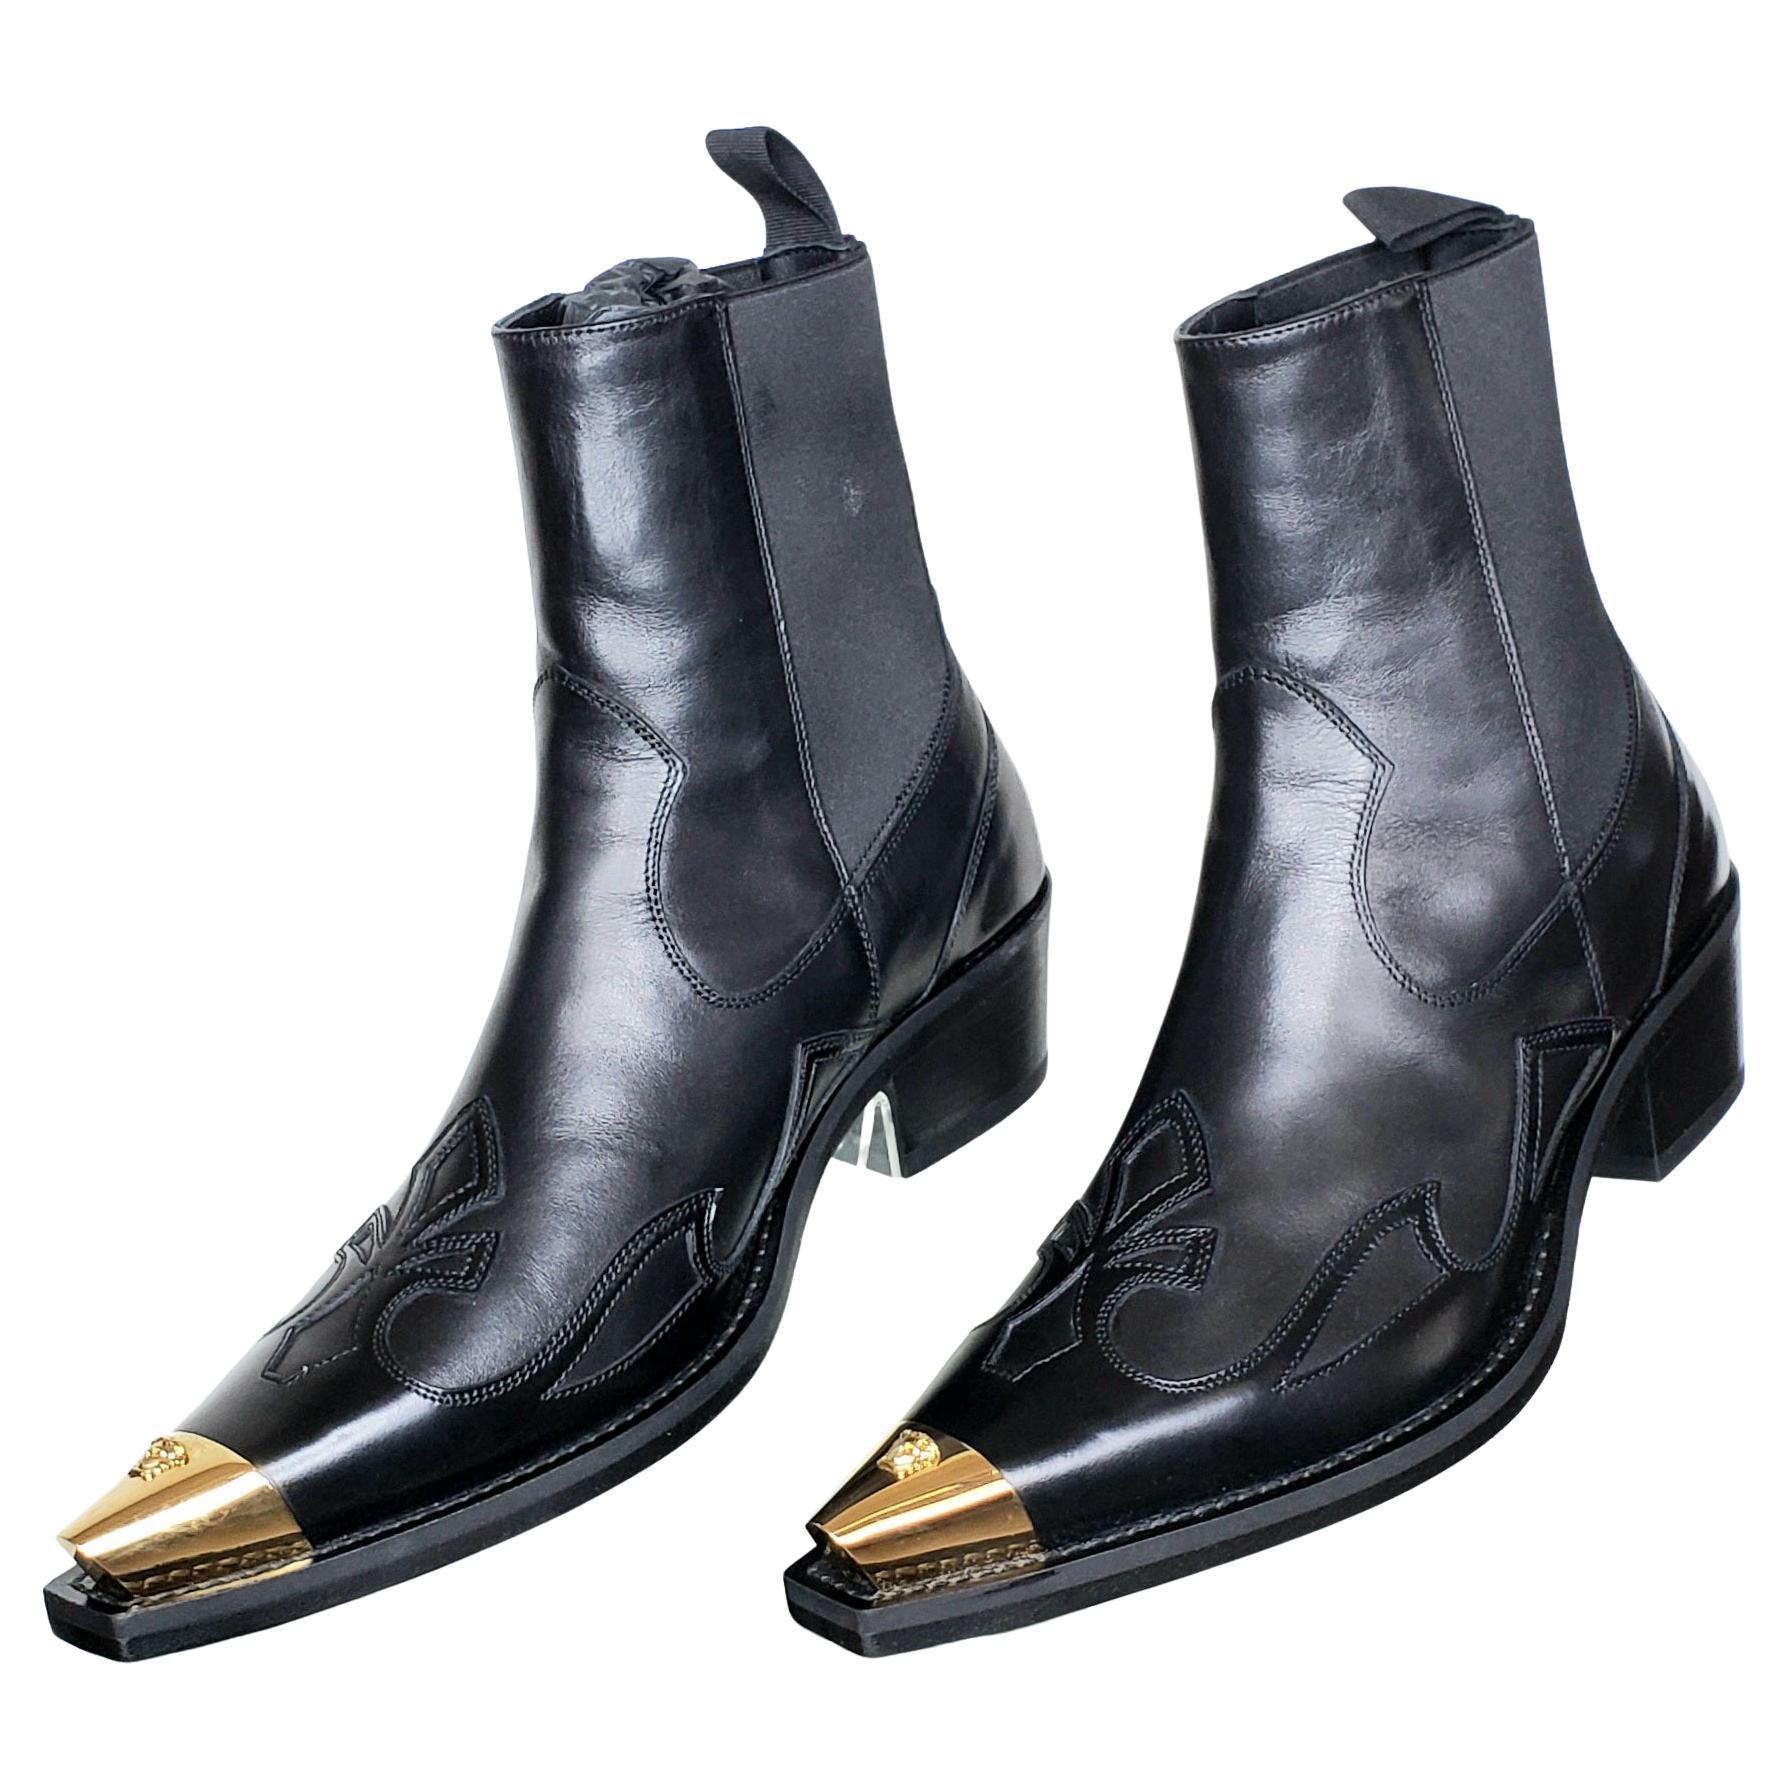 VERSACE GOTHIC SIGNS 24k GOLD PLATED MEDUSA TIPS BLACK LEATHER BOOTS 40.5 - 7.5